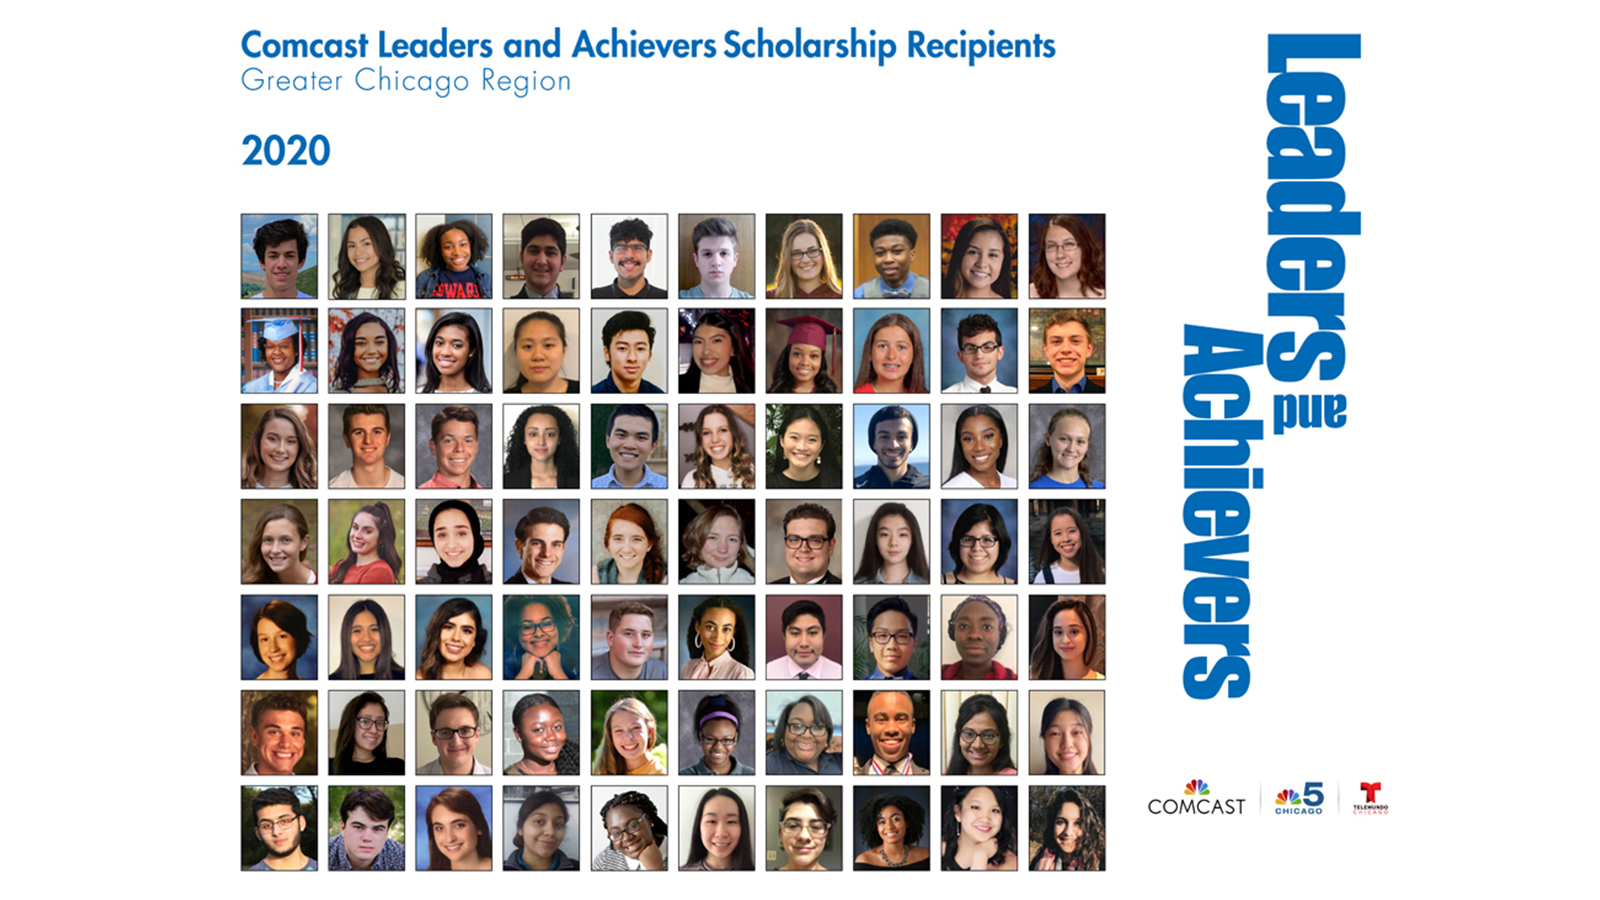 Leaders and Achievers Participants